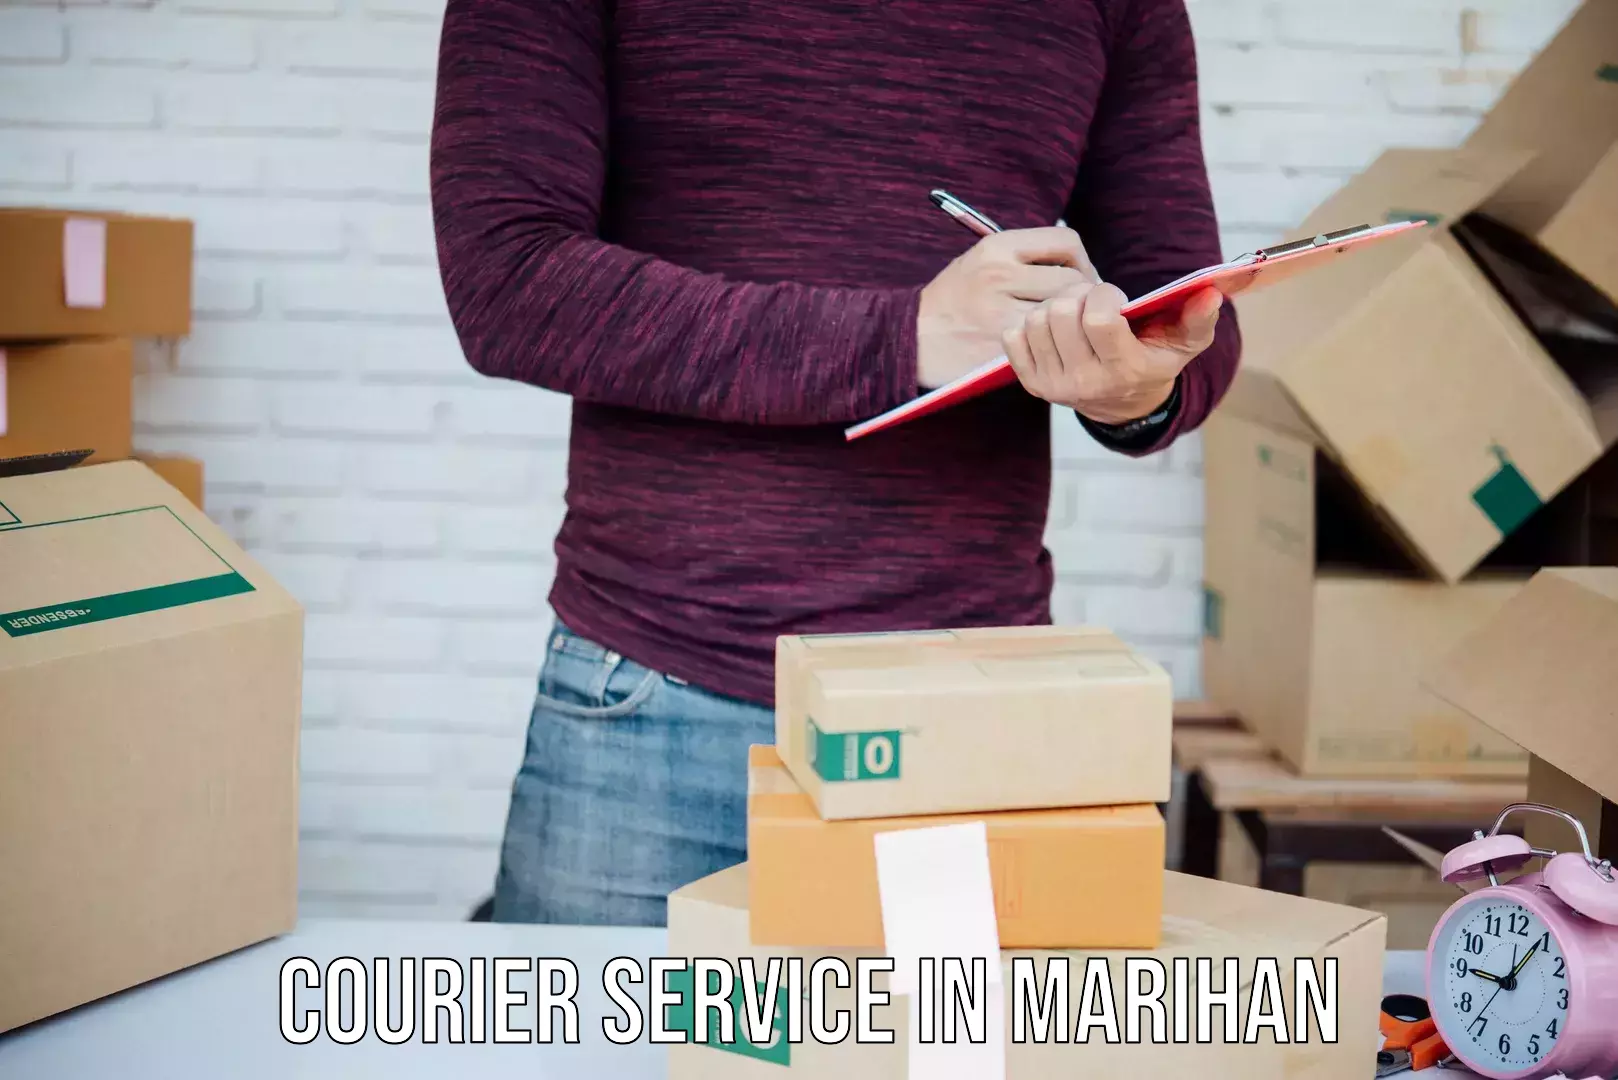 Full-service courier options in Marihan